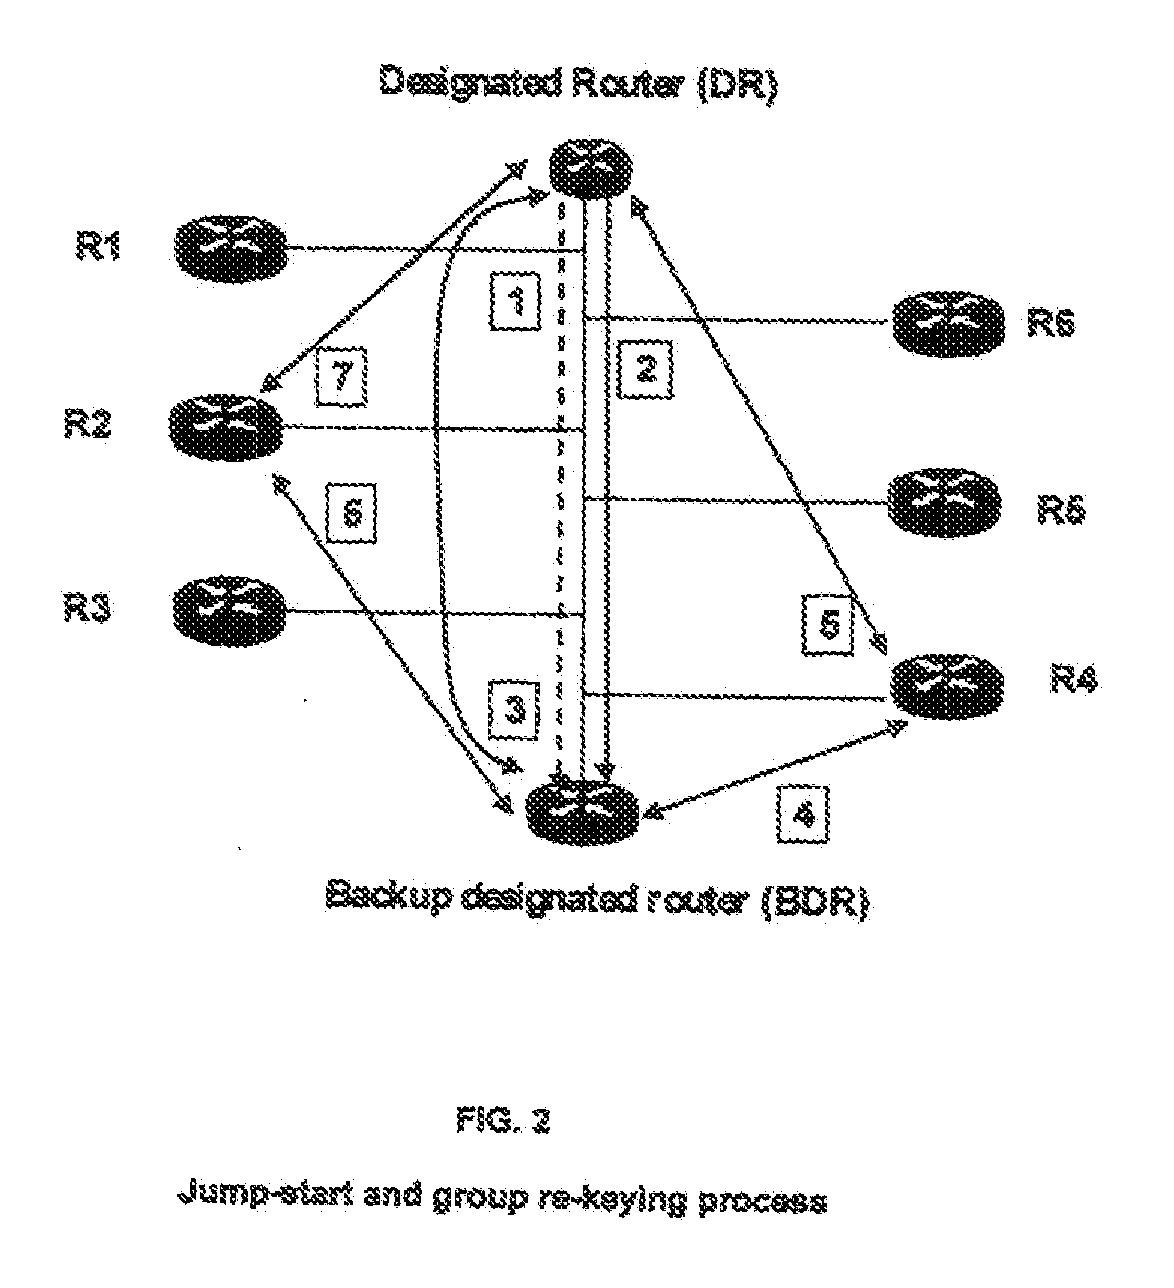 System and method for nodes communicating in a shared network segment